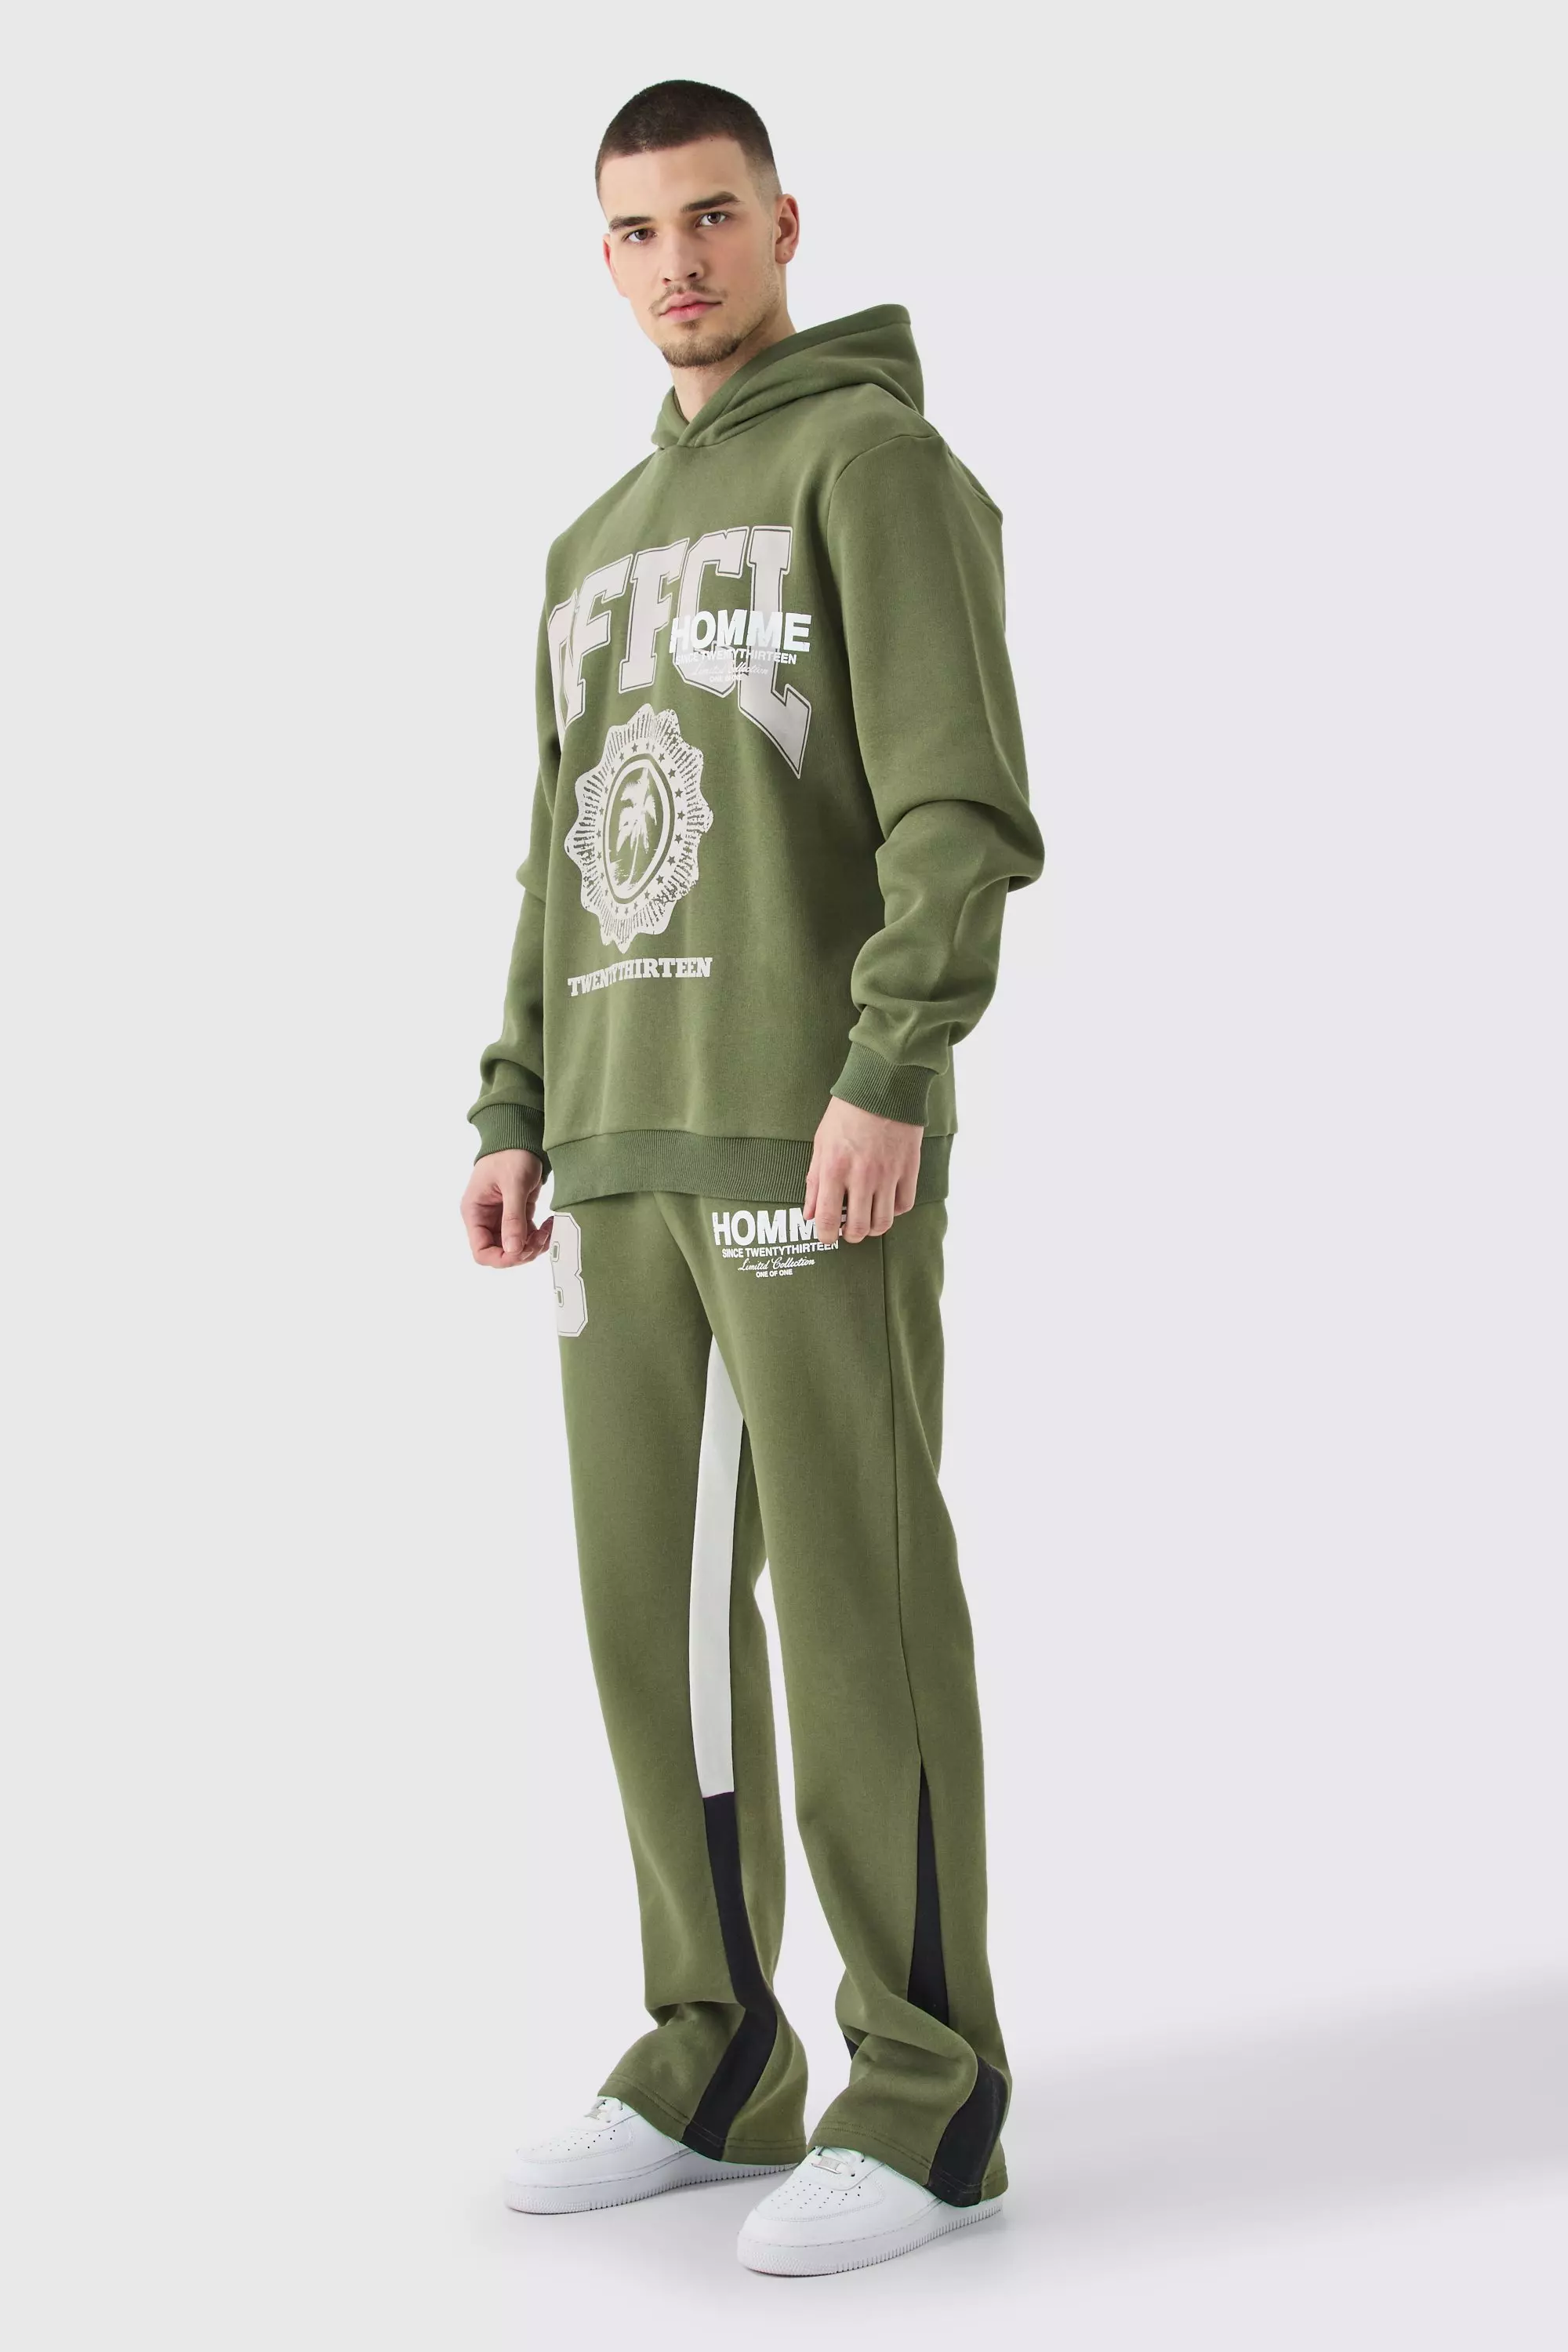 Khaki Tall Homme Official 13 Hooded Gusset Tracksuit In Khaki